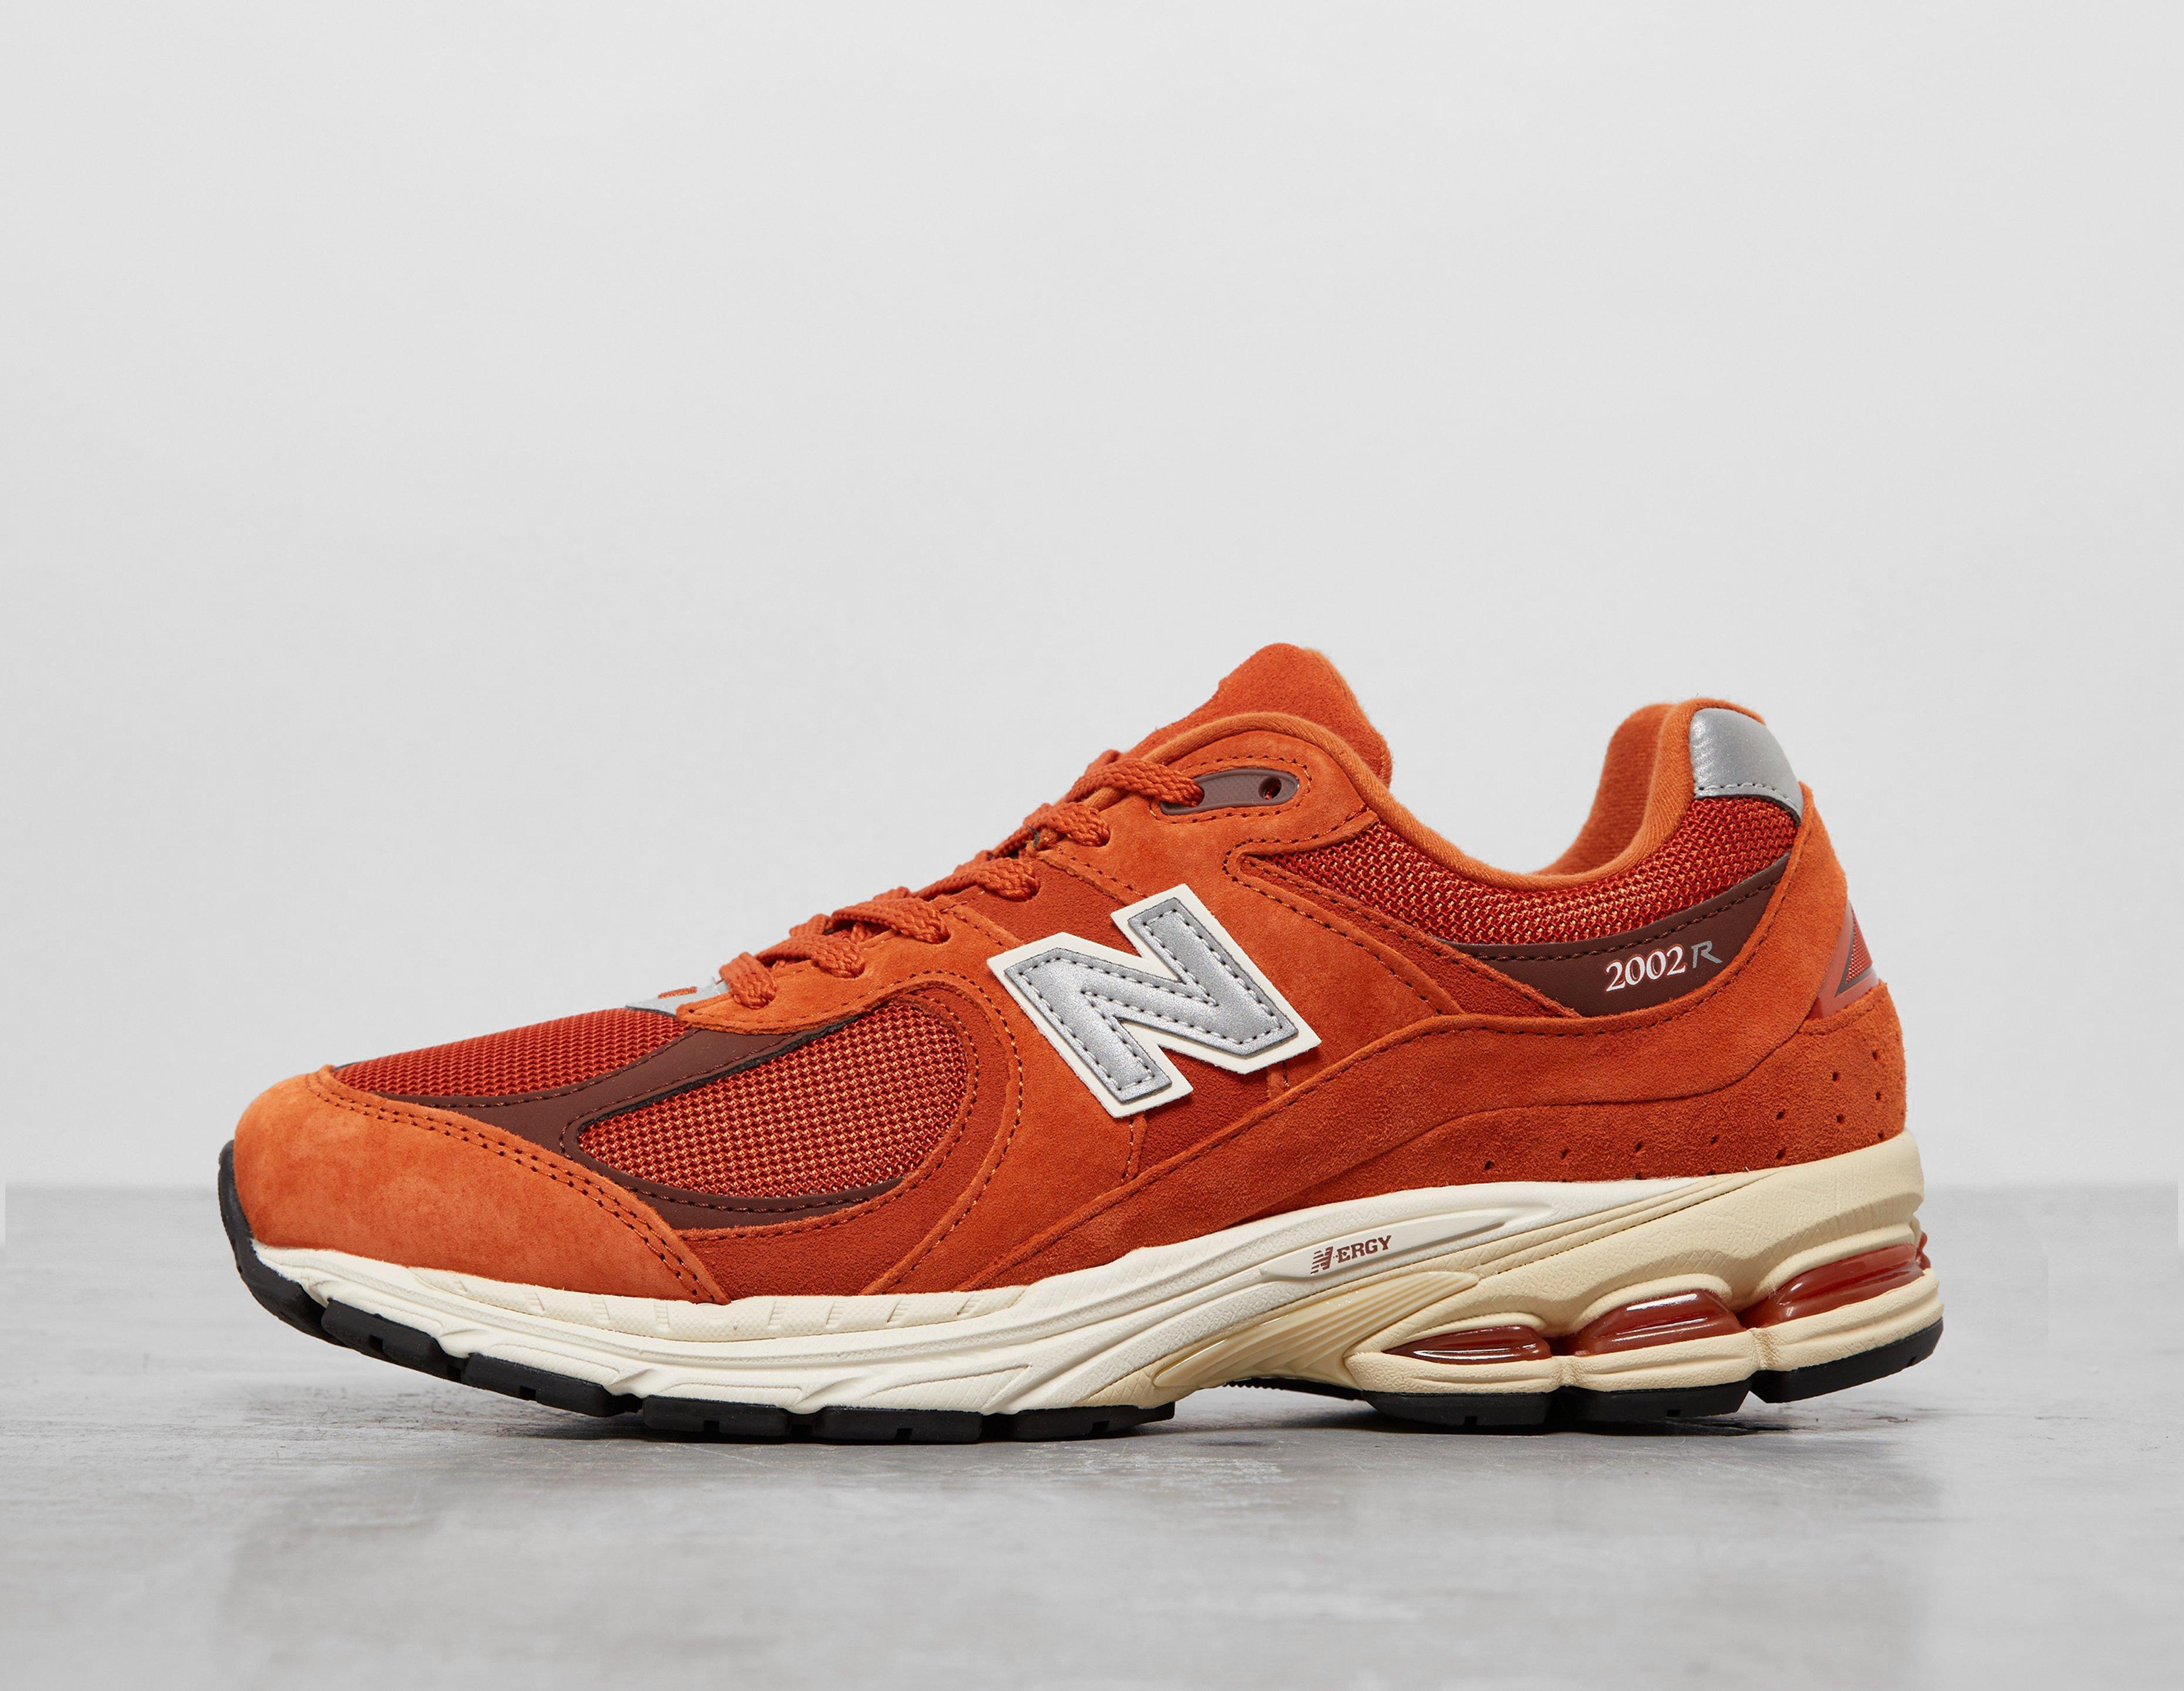 Closer Look at the New Balance 990v6 Spiffy | HealthdesignShops